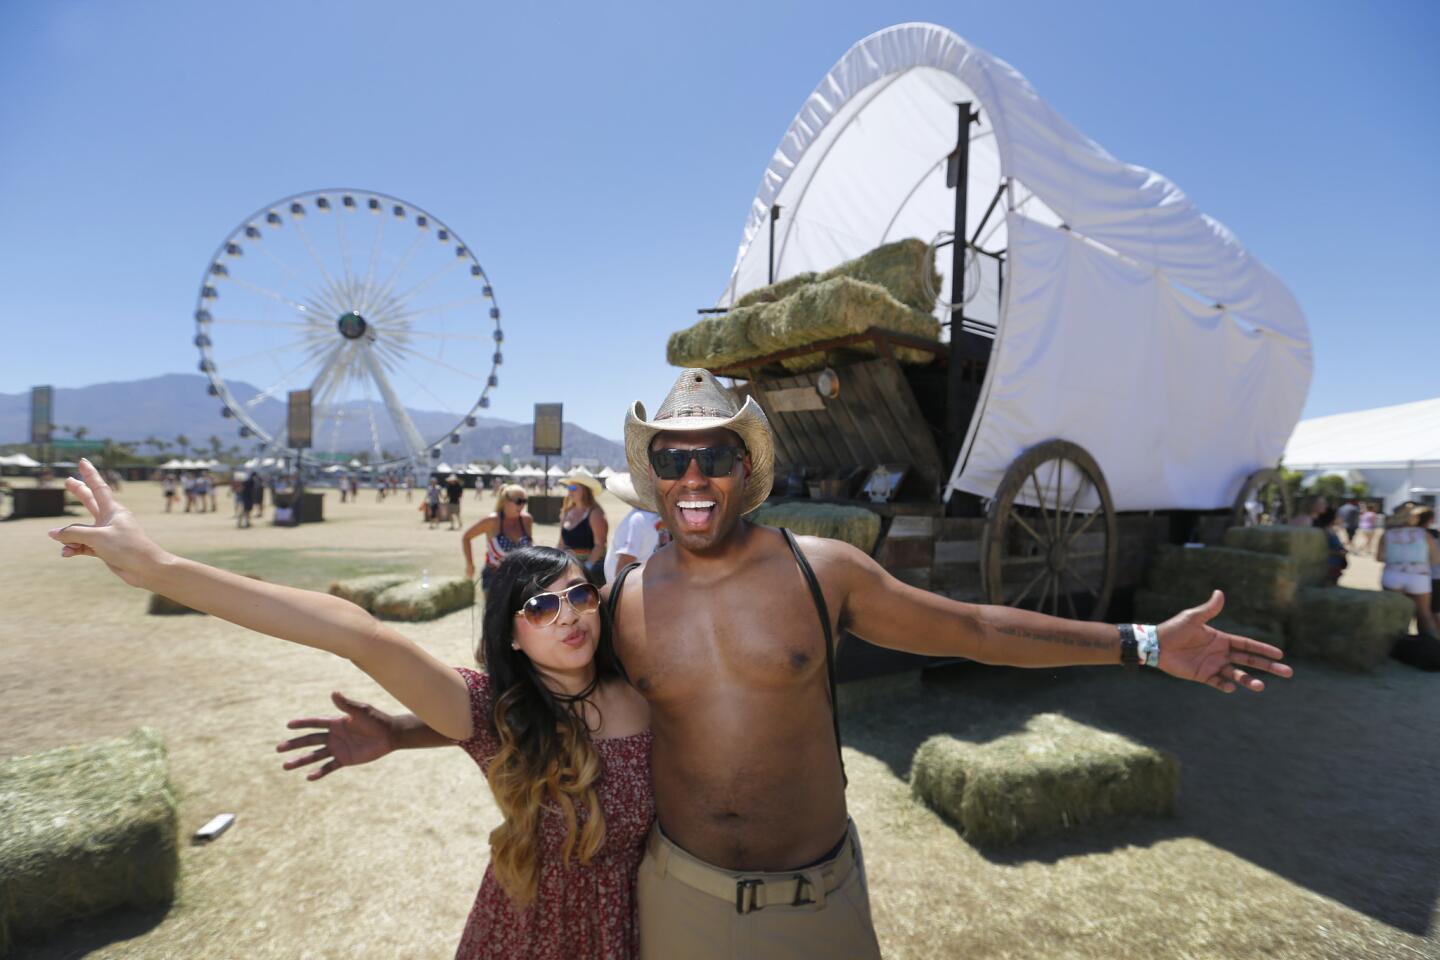 Jenn Nguyen and Amahl Harris, both of Santa Barbara, pose in front of a giant covered wagon and La Grande XL Ferris wheel on the third day of the Stagecoach country music festival at the Empire Polo Fields in Indio, Calif., on April 30, 2017.